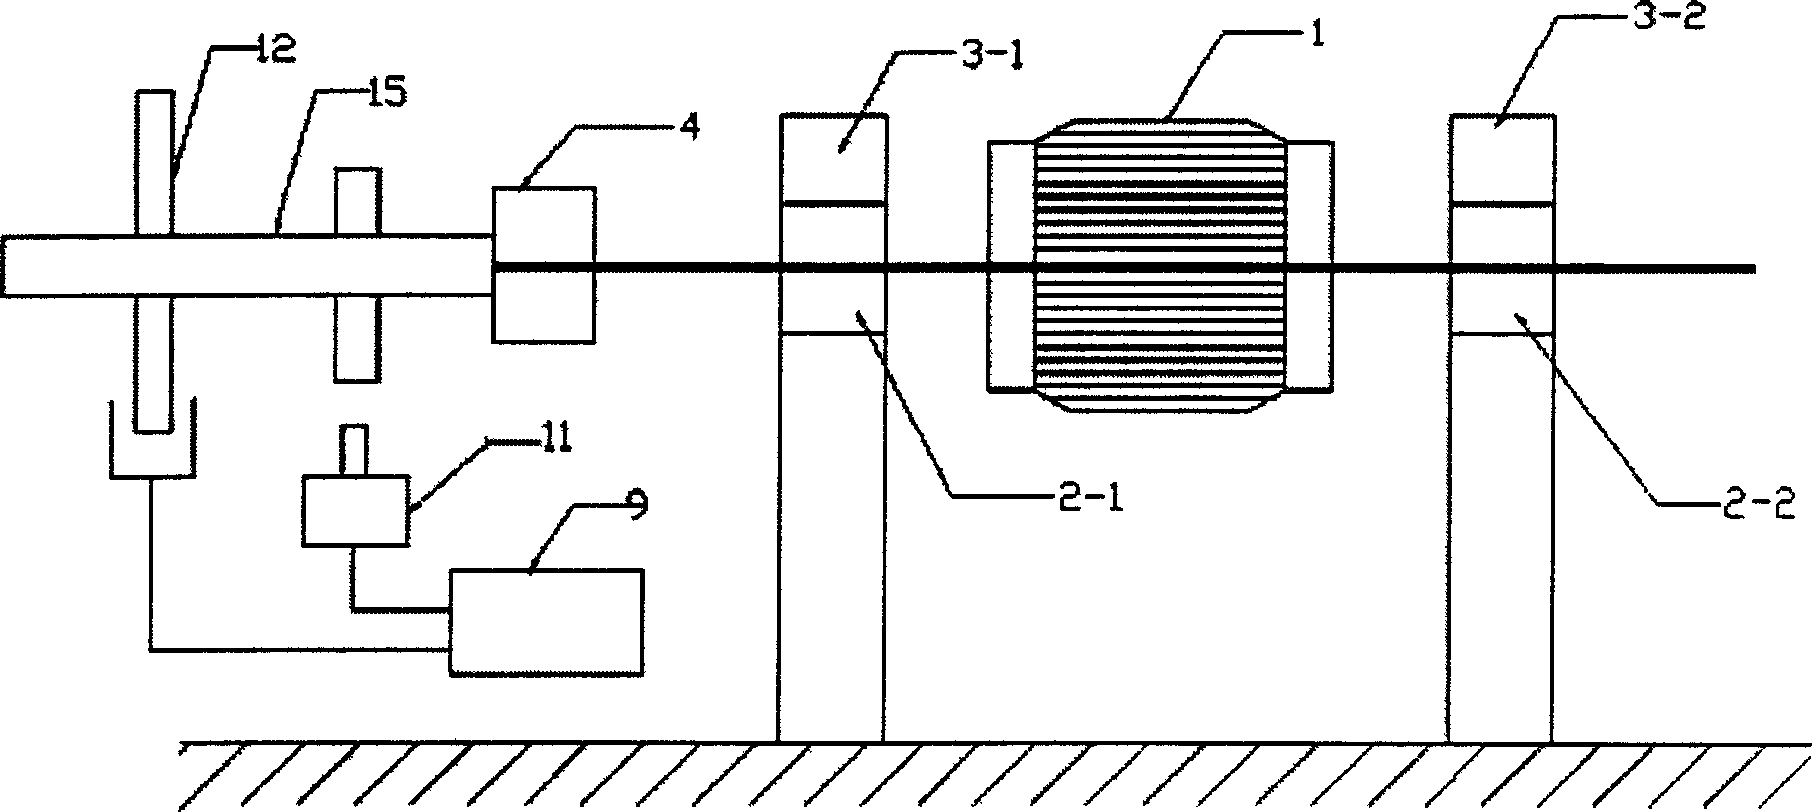 Rotating magnetic field type driver for active controlling torsional vibration of rotational axis system